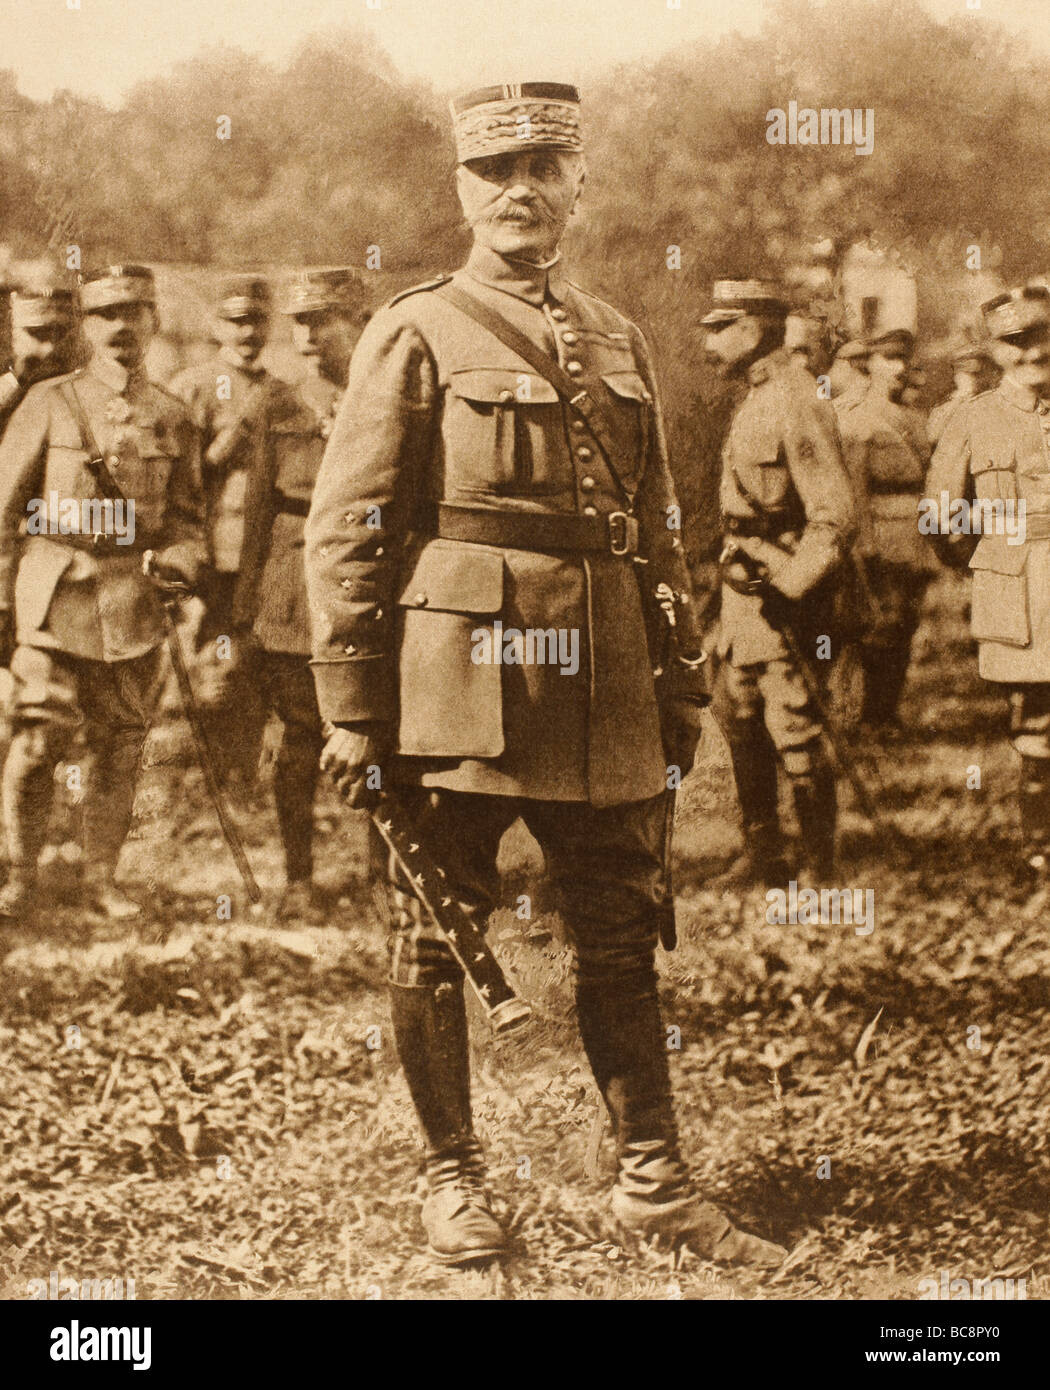 Marshal of France, Ferdinand Foch, 1851 - 1929. French general, military theorist and Marshal of France.  From L'Illustration 1918. Stock Photo